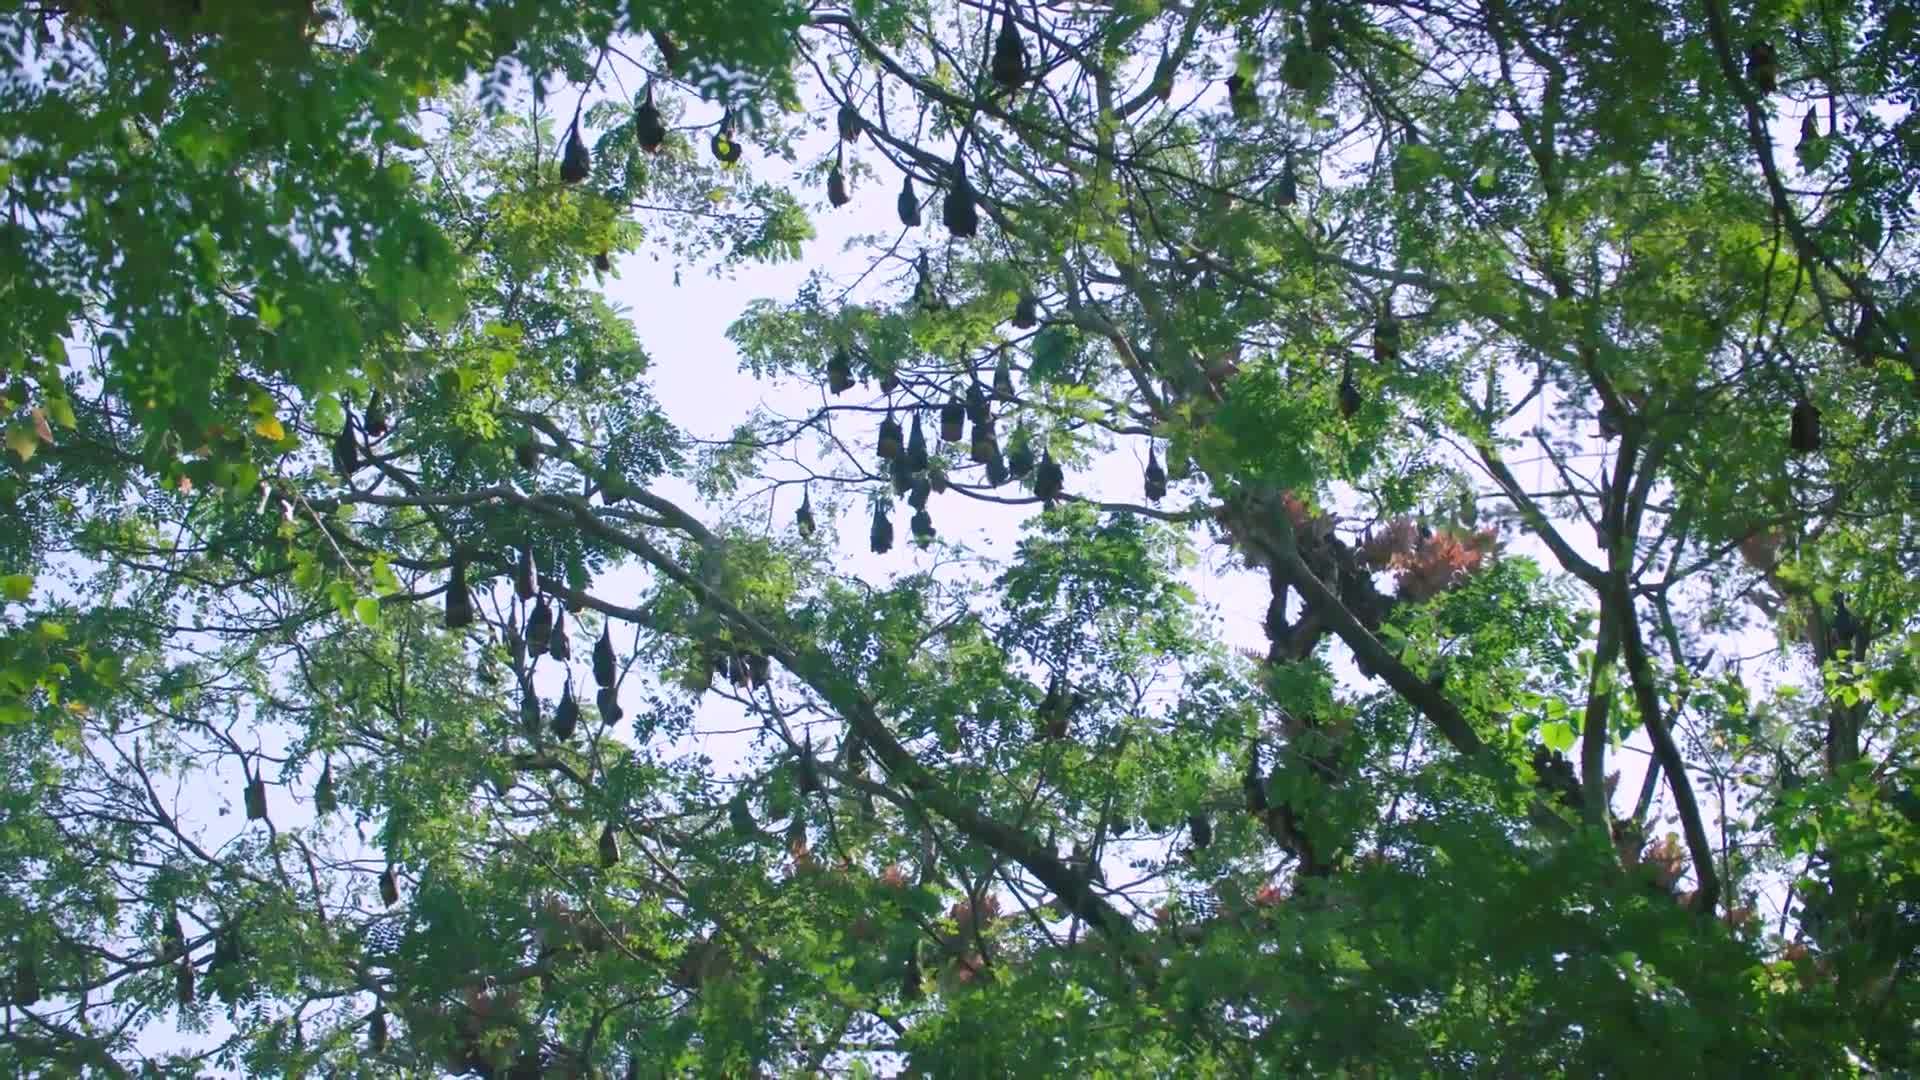 Field in Focus: Flying Foxes